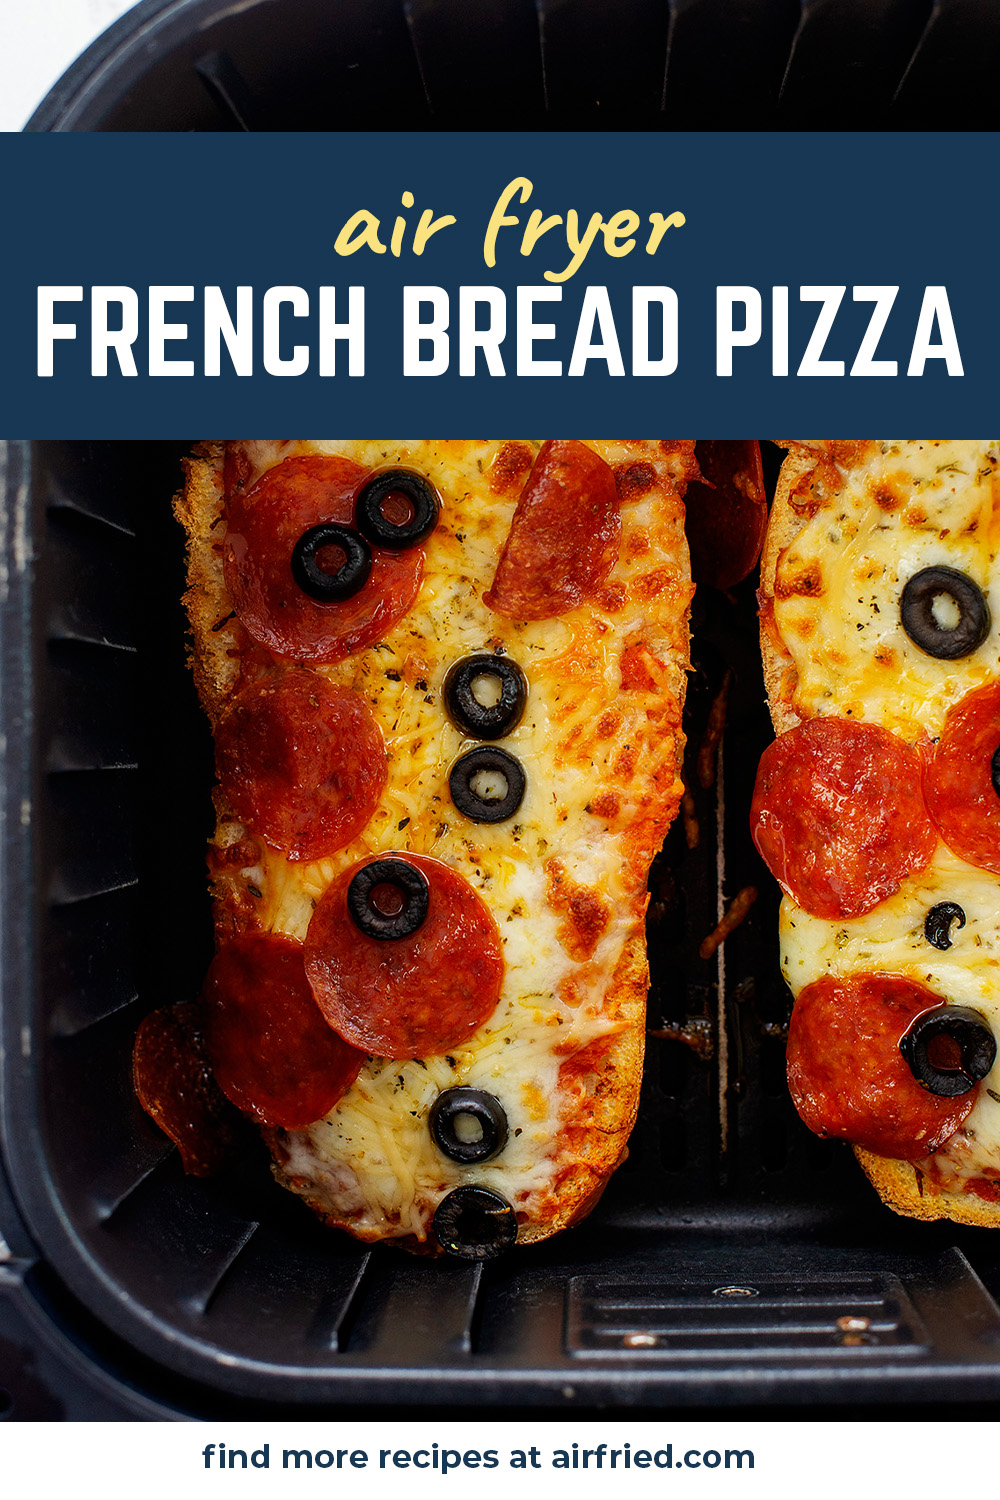 We love this French bread pizza recipe.  Quick to cook, and easy to customize!